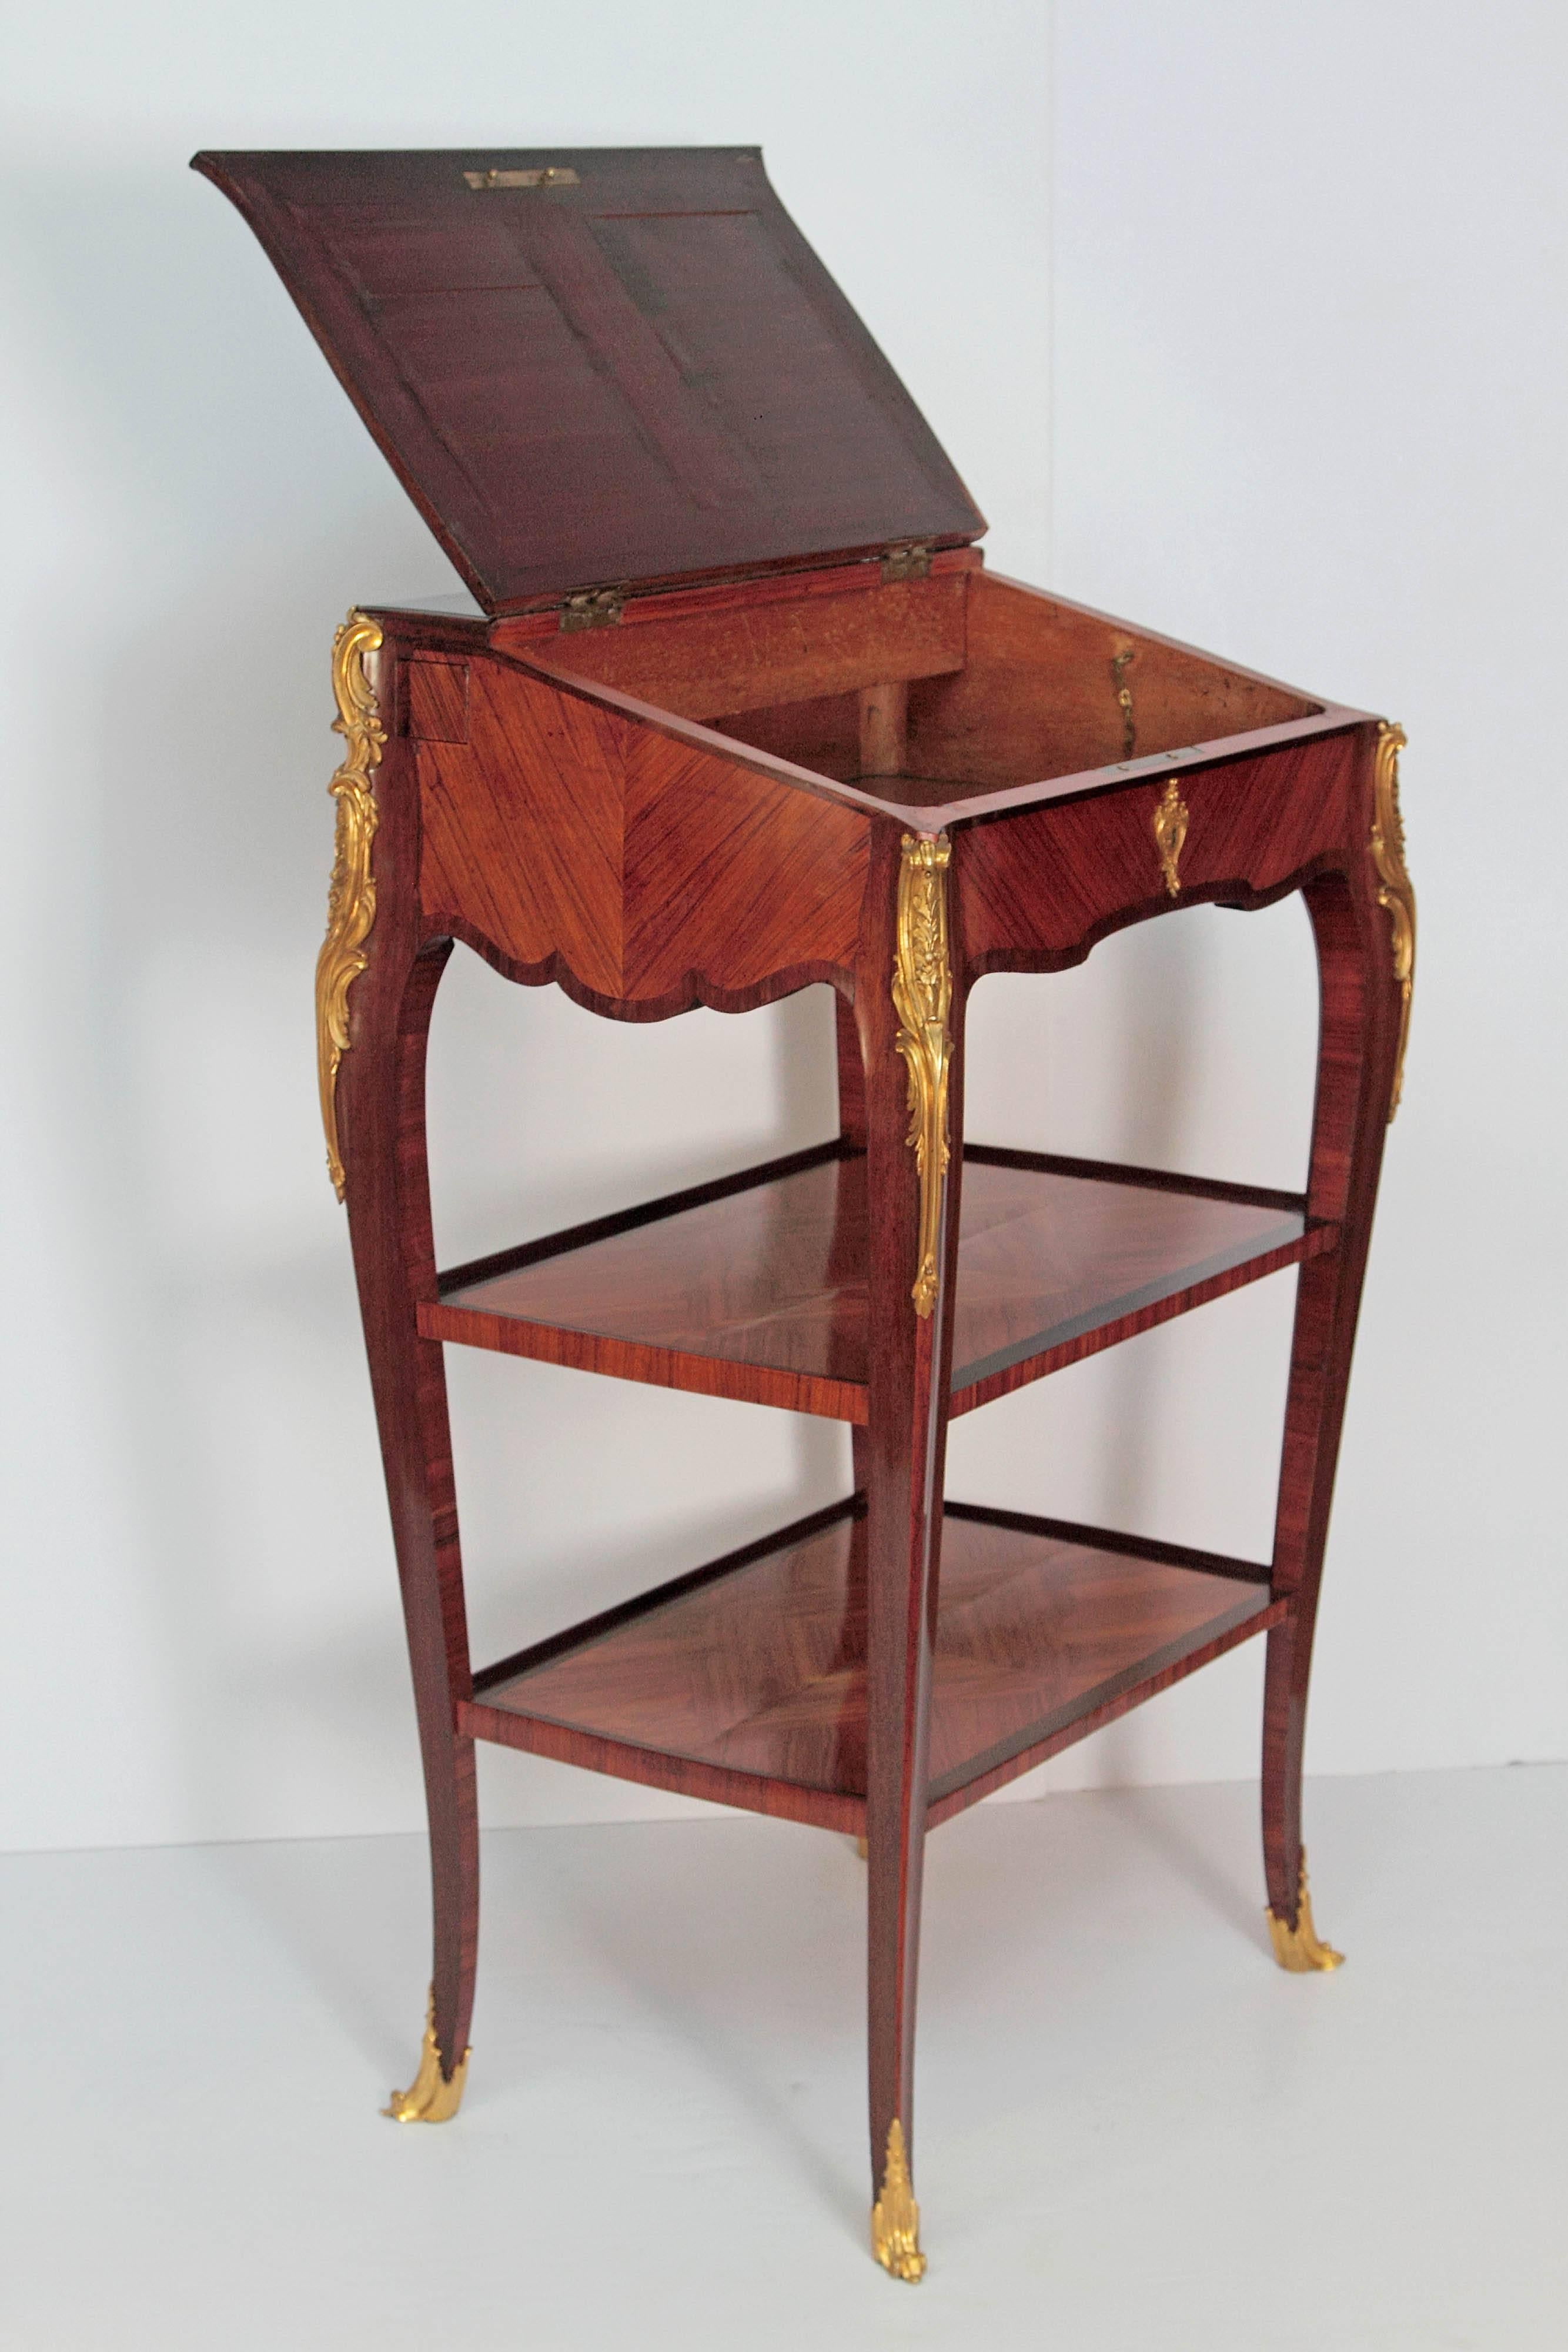 19th Century Louis XV Style Tall Standing Desk / Table by Alfred Emmanuel Louis Beurdley For Sale